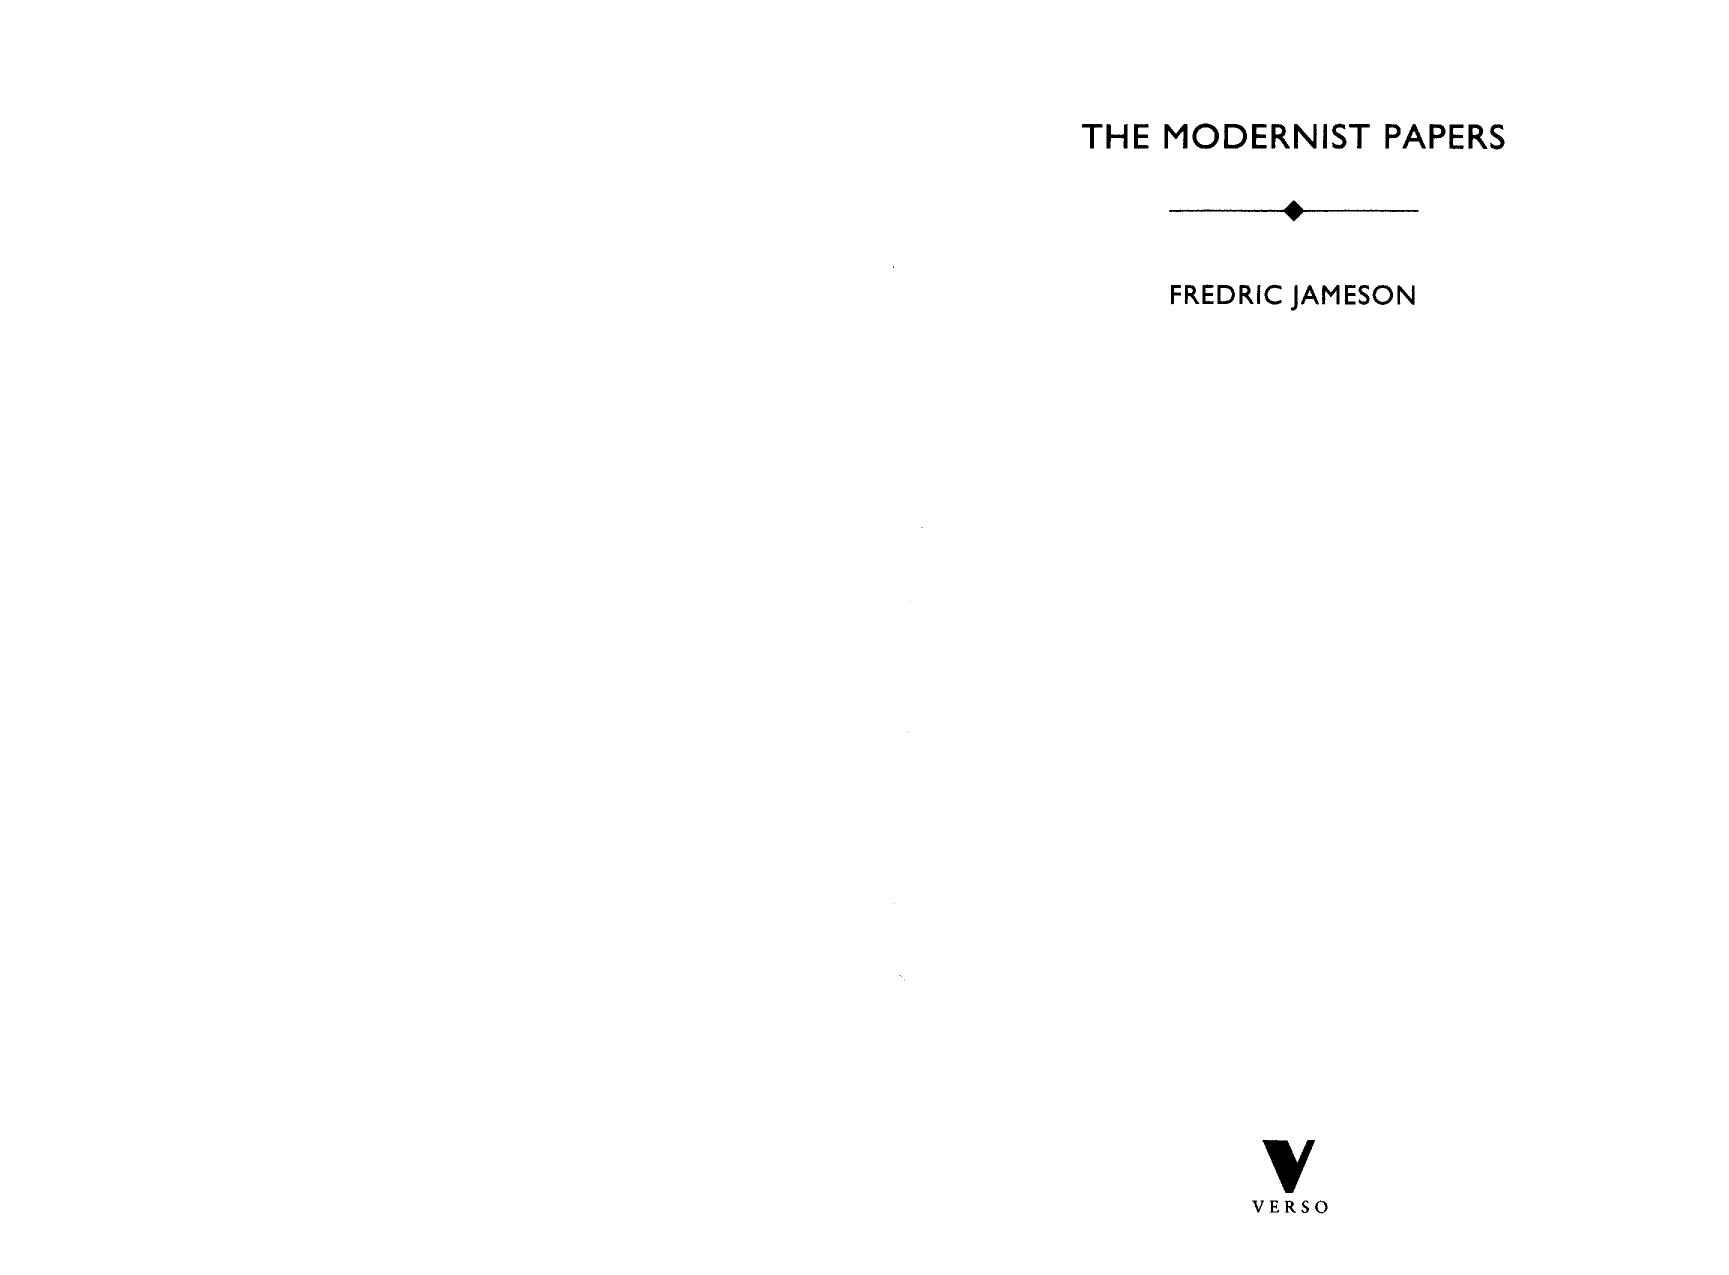 The Modernist Papers by Fredric Jameson